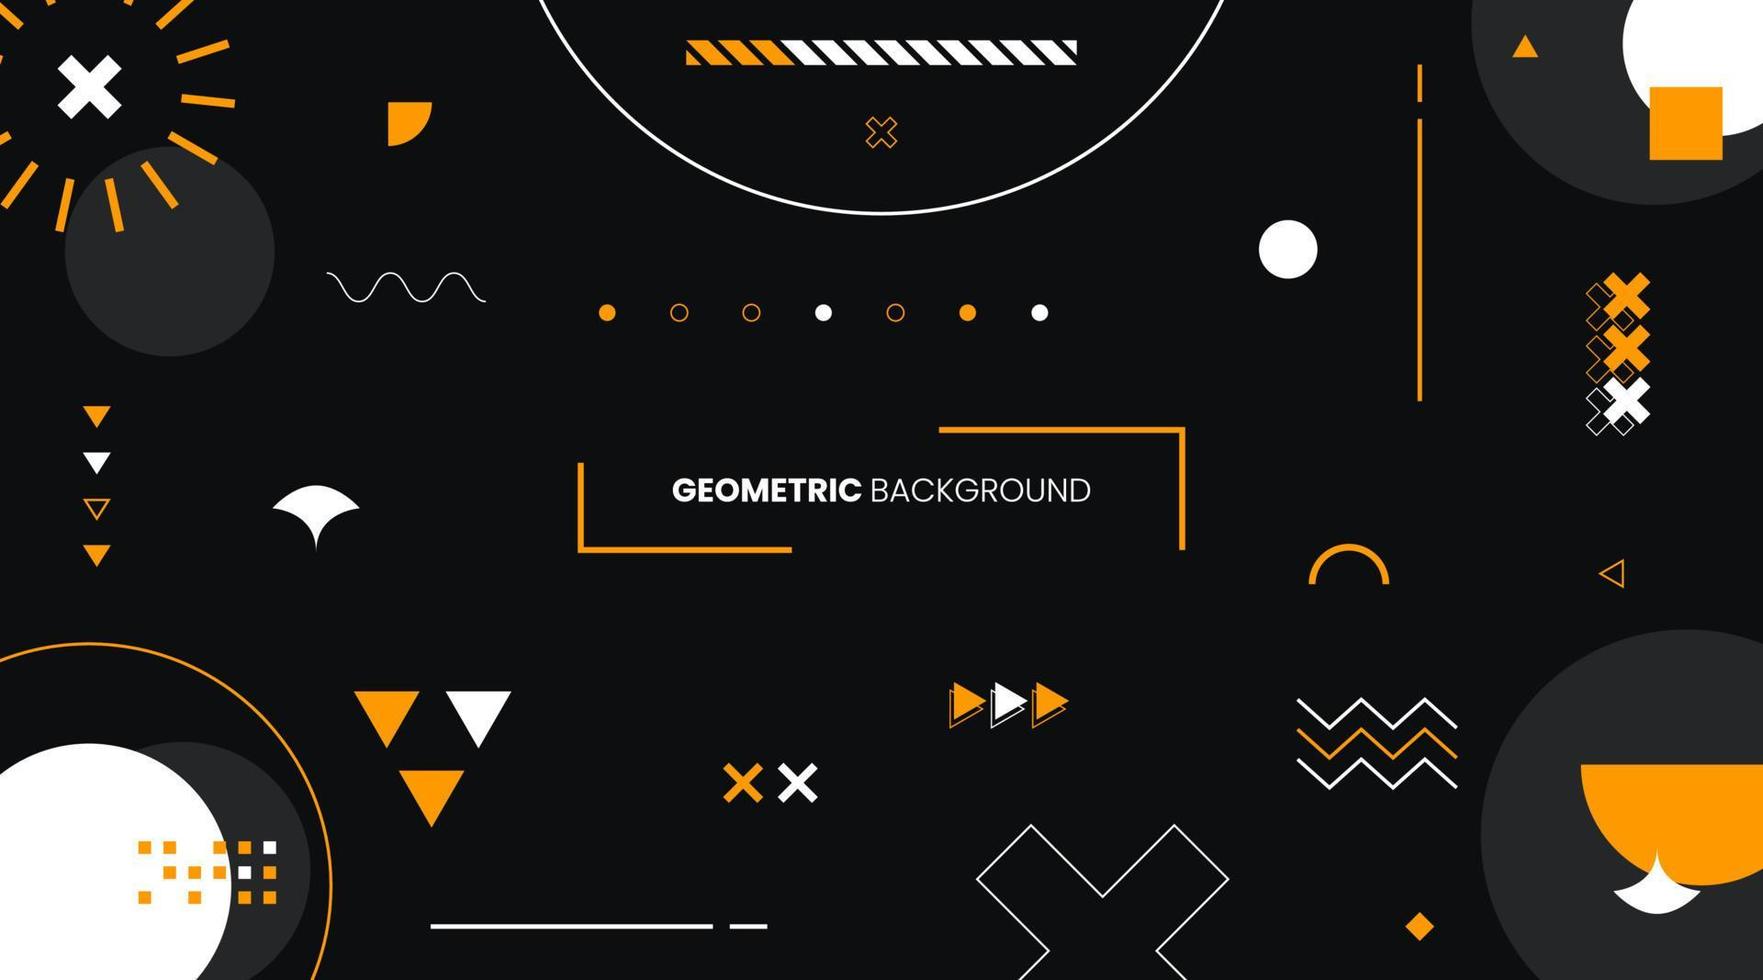 Abstract Geometric Background vector